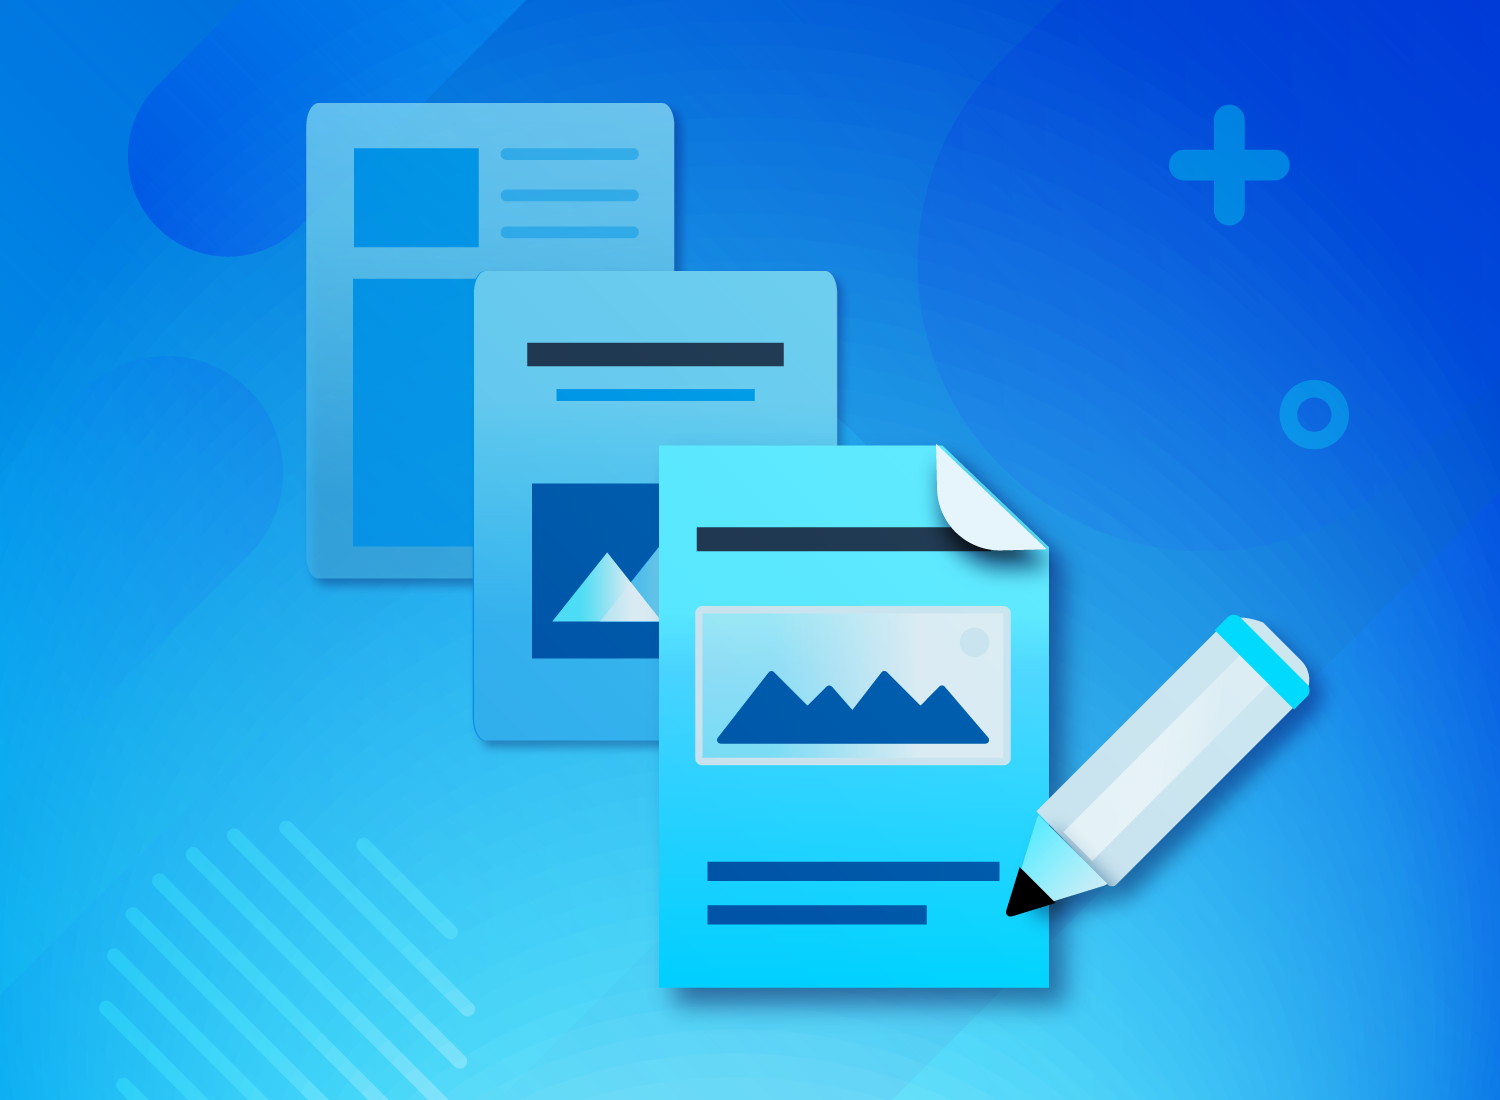 Illustrative graphic for content creation, specifically on "how to create a training manual." It features three overlapping paper documents with digital icons, displayed against a gradient blue background with abstract shapes. The foremost document has an image of mountains, symbolizing visuals in manuals, and is paired with a pencil, indicating the editing or creation process. The design conveys a theme of informative and educational material development.